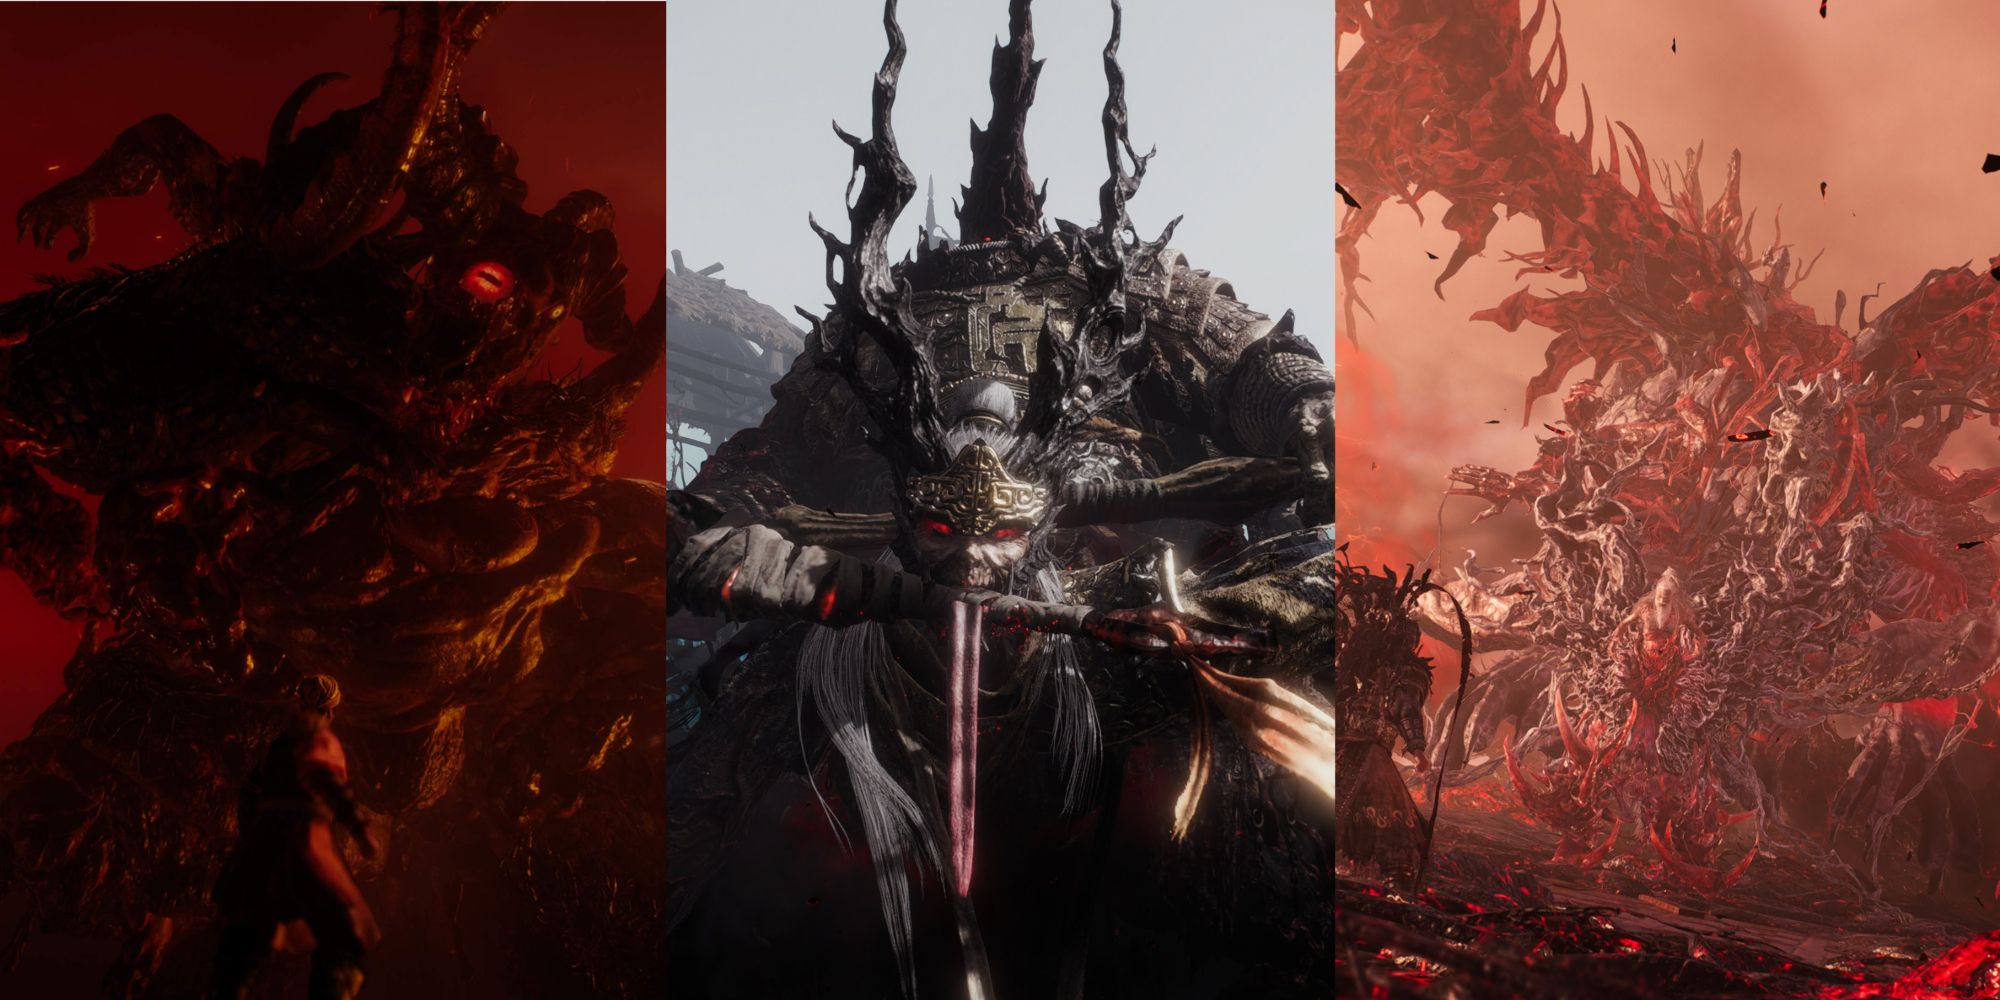 Three images. From left to right: Taotie under a red sky, Yan Liang and Wen Chou, Embodiment of Demonic Qi